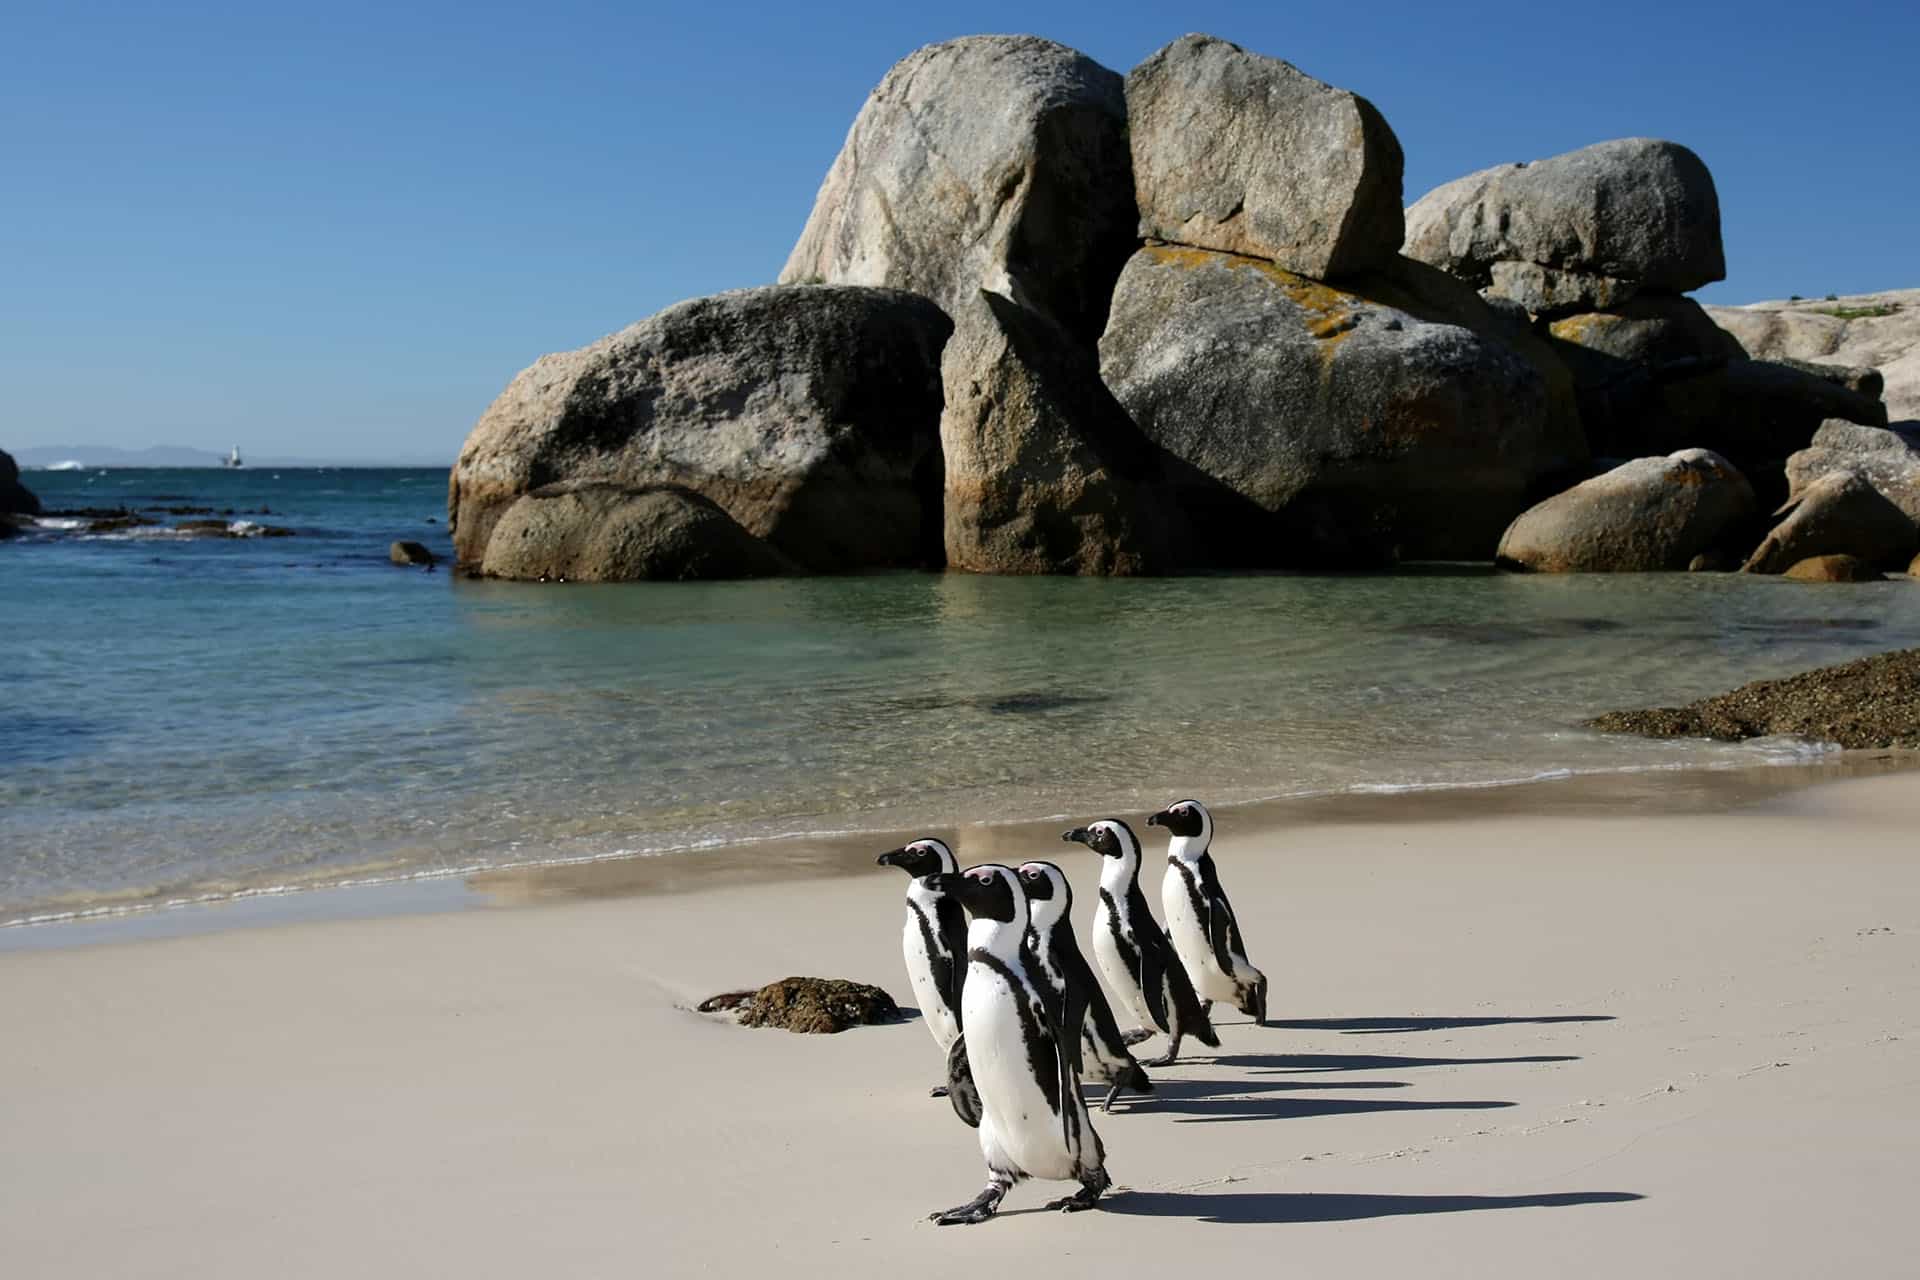 African penguins - animals that make up the Marine Big Five in South Africa.